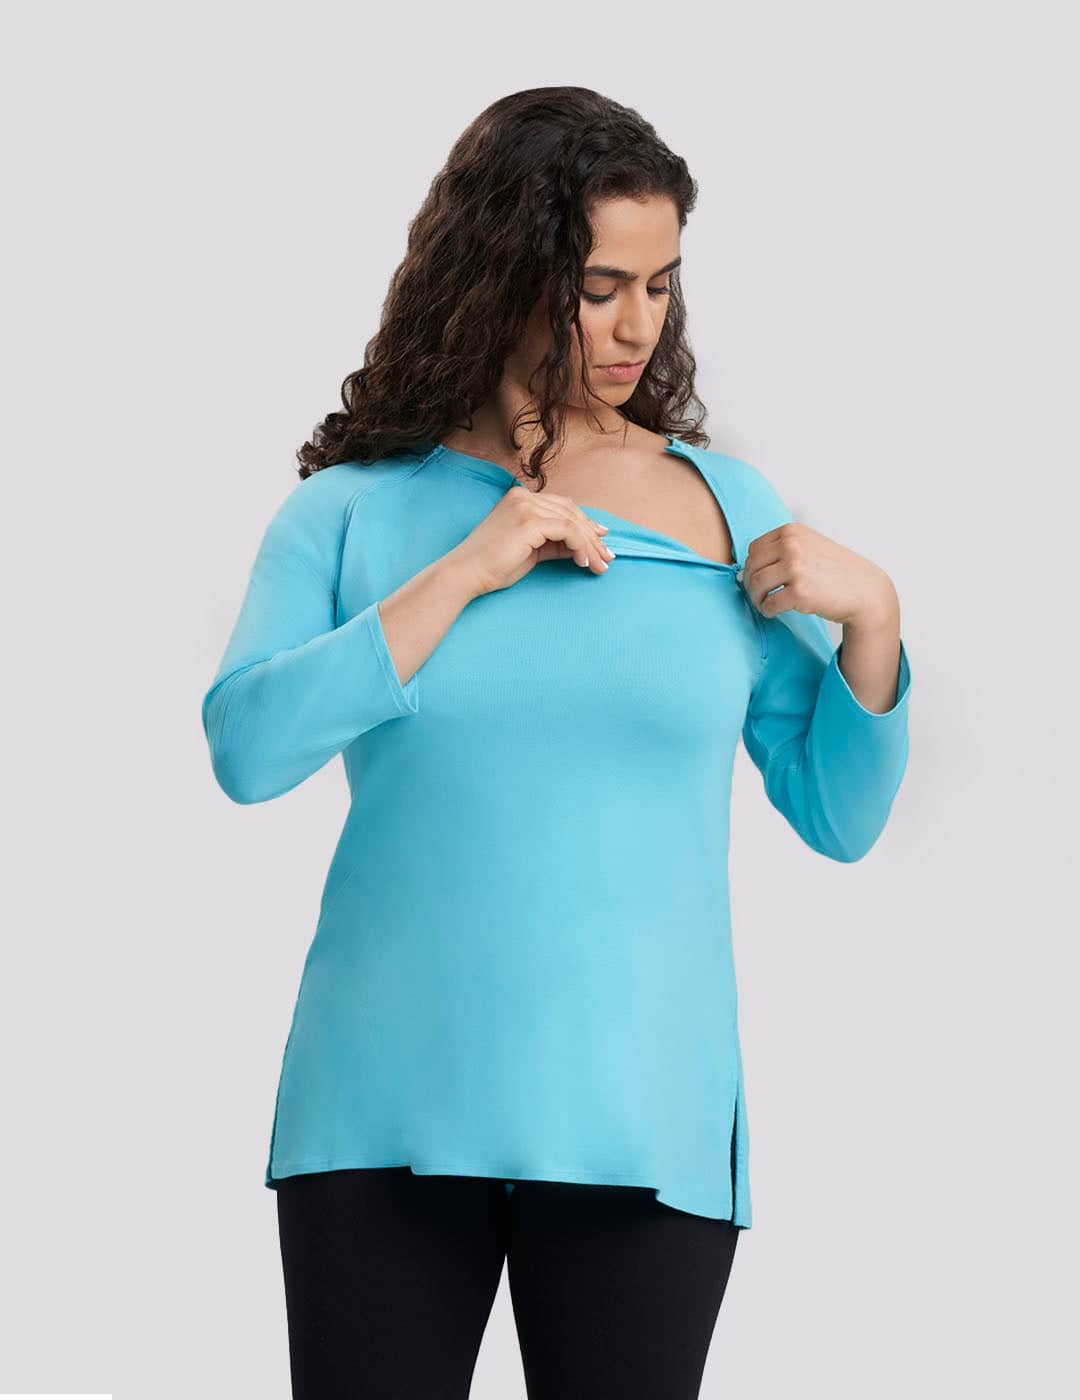 Womens Chest Port Access Teal Infusion Top